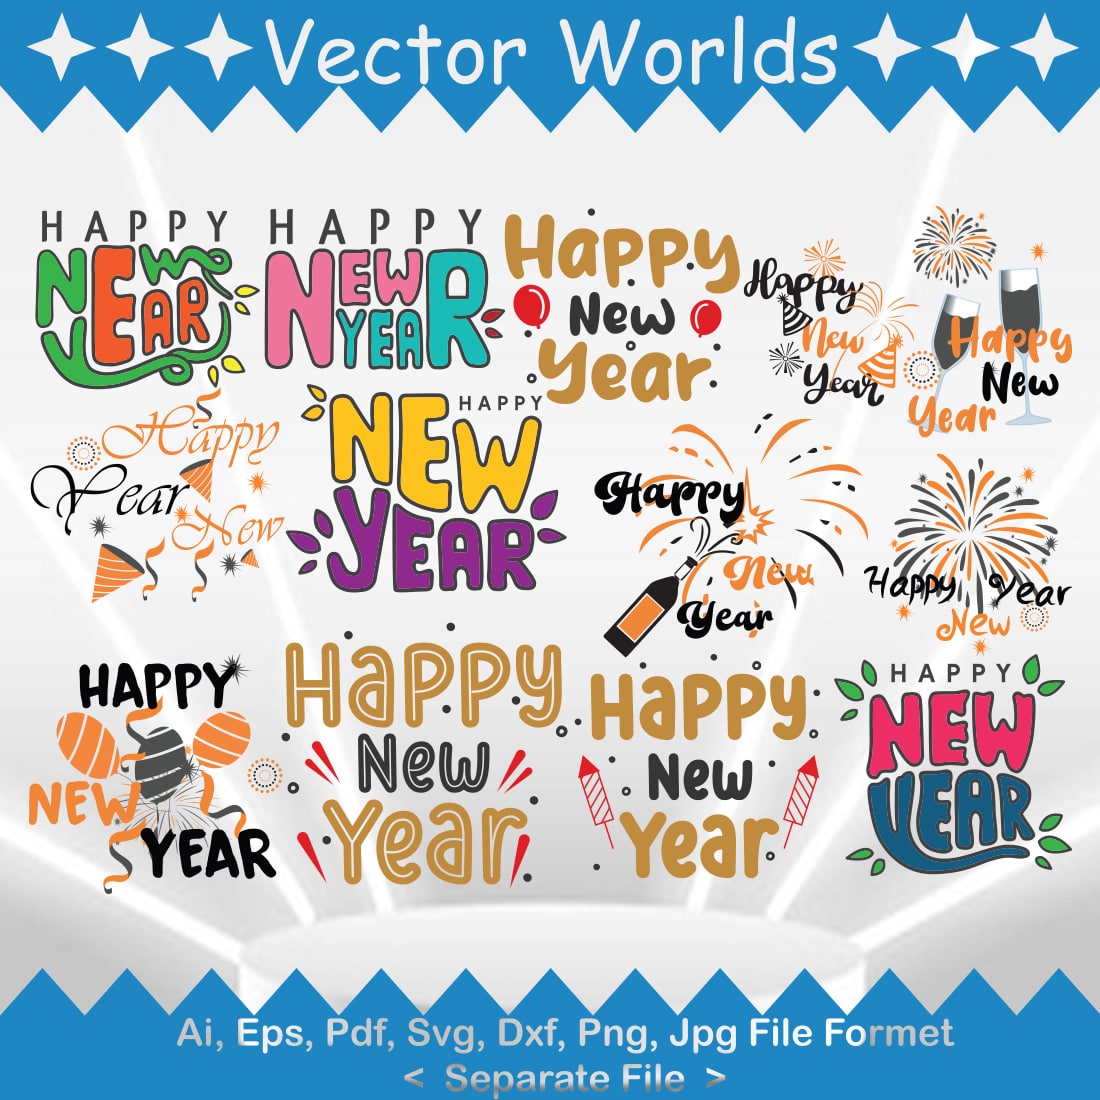 Happy New Year SVG Vector Design cover image.